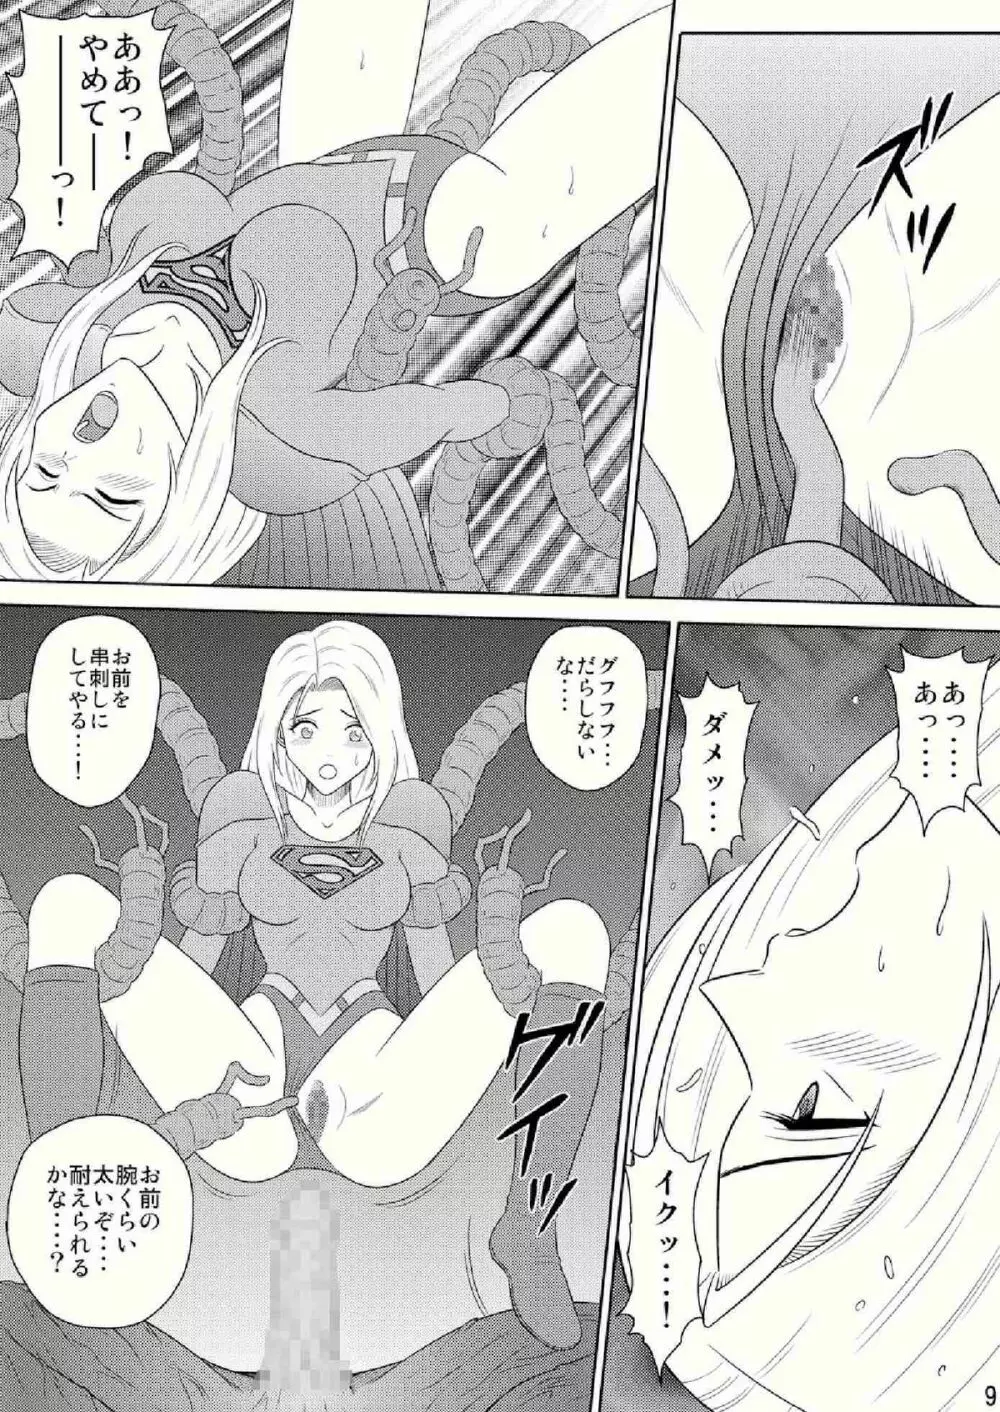 Toukikoubou vol.2 SUPER GIRL - Humiliation and Execution - Page.9